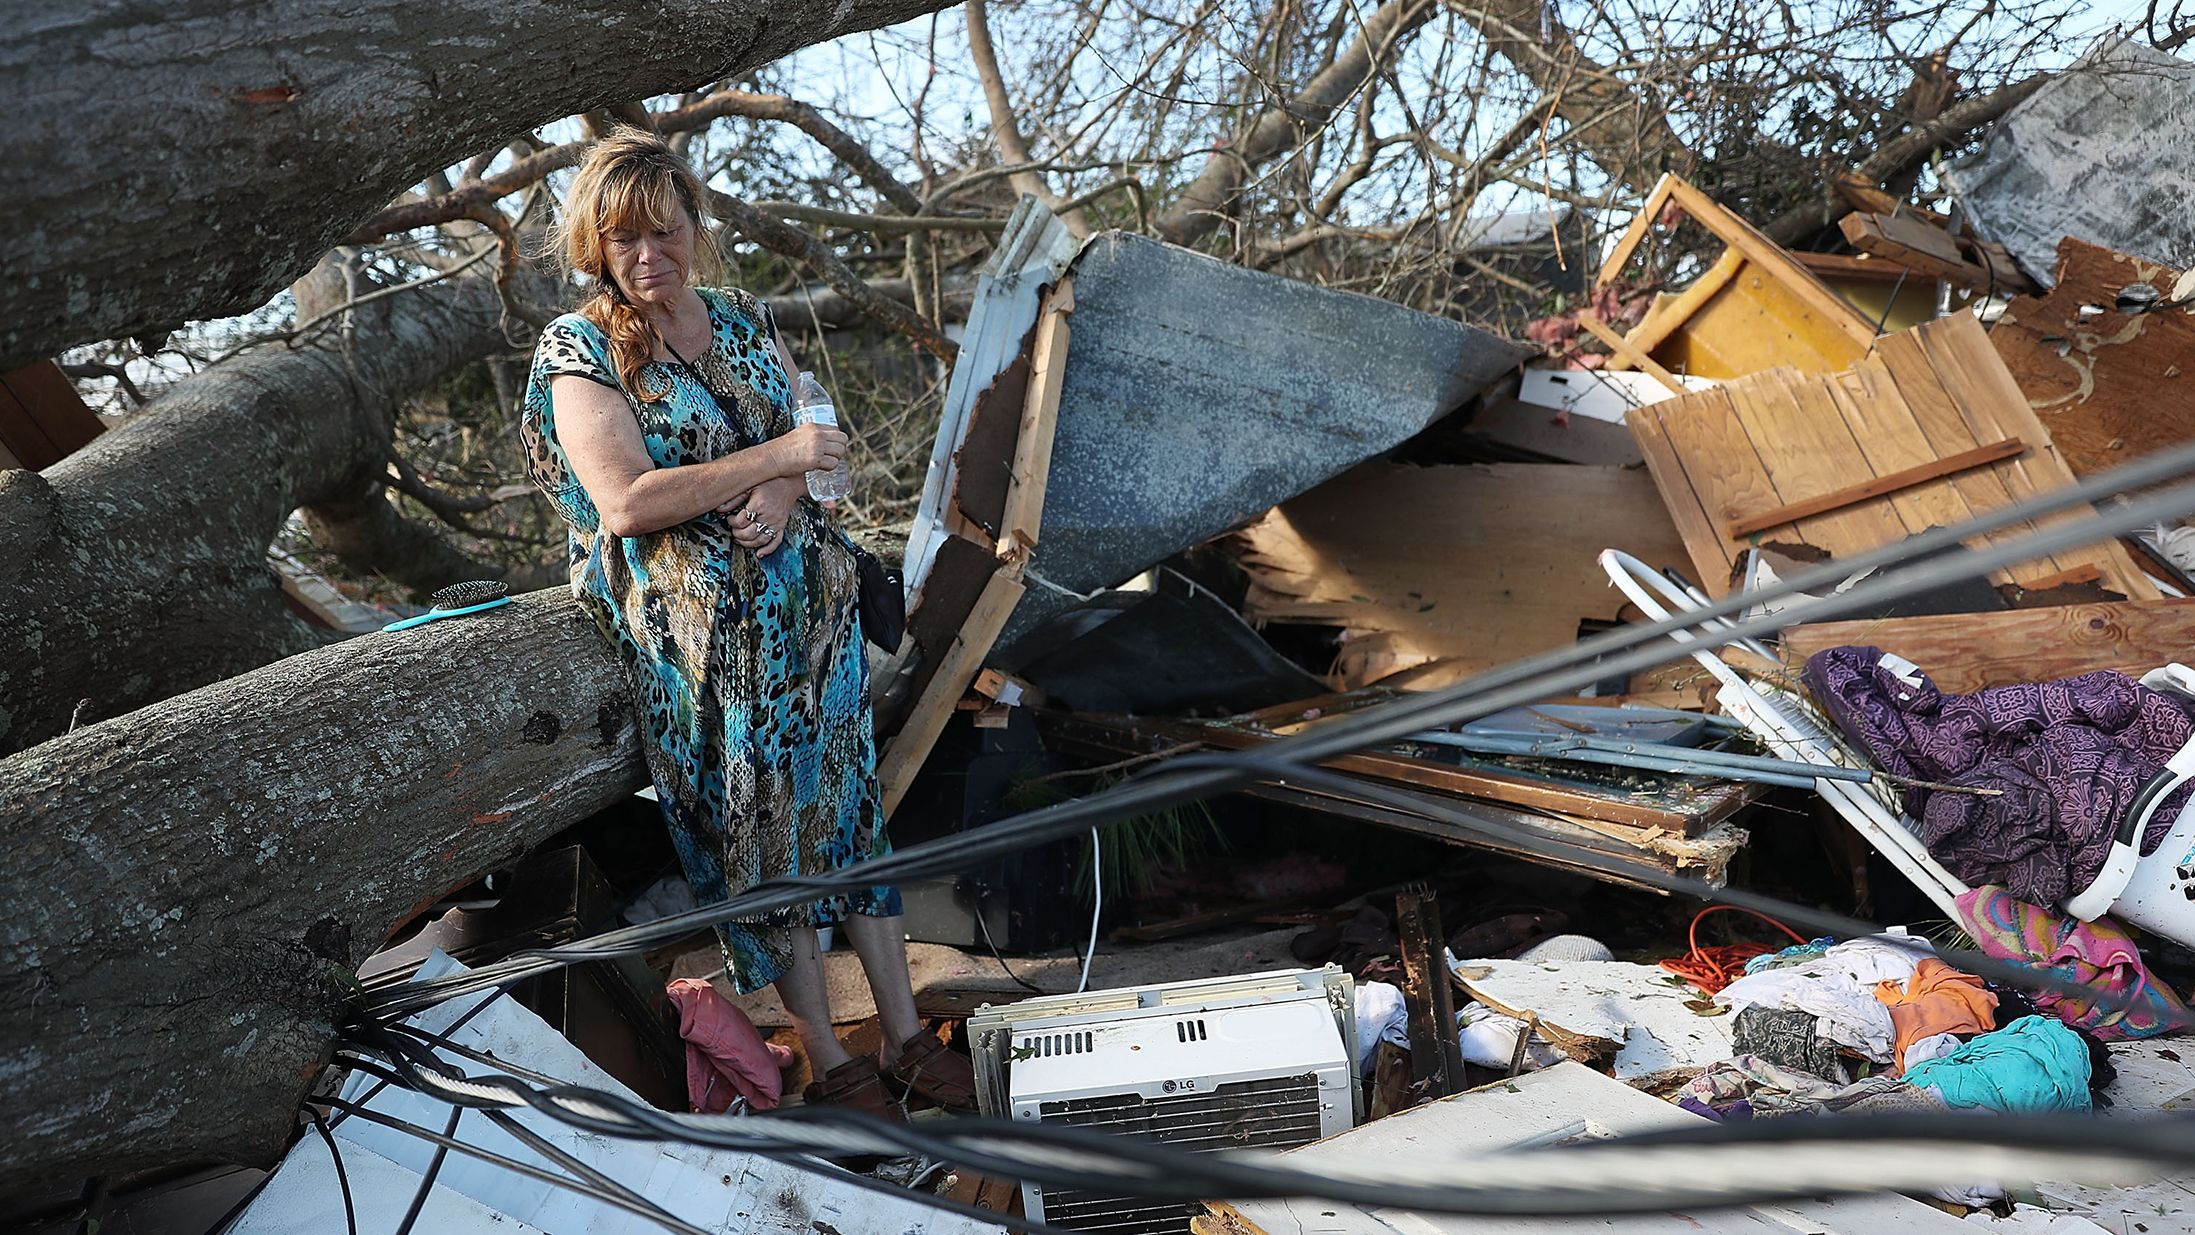 Kathy Coy stands among what is left of her home in Panama City. She said she was in the home when it was blown apart and is thankful to be alive.